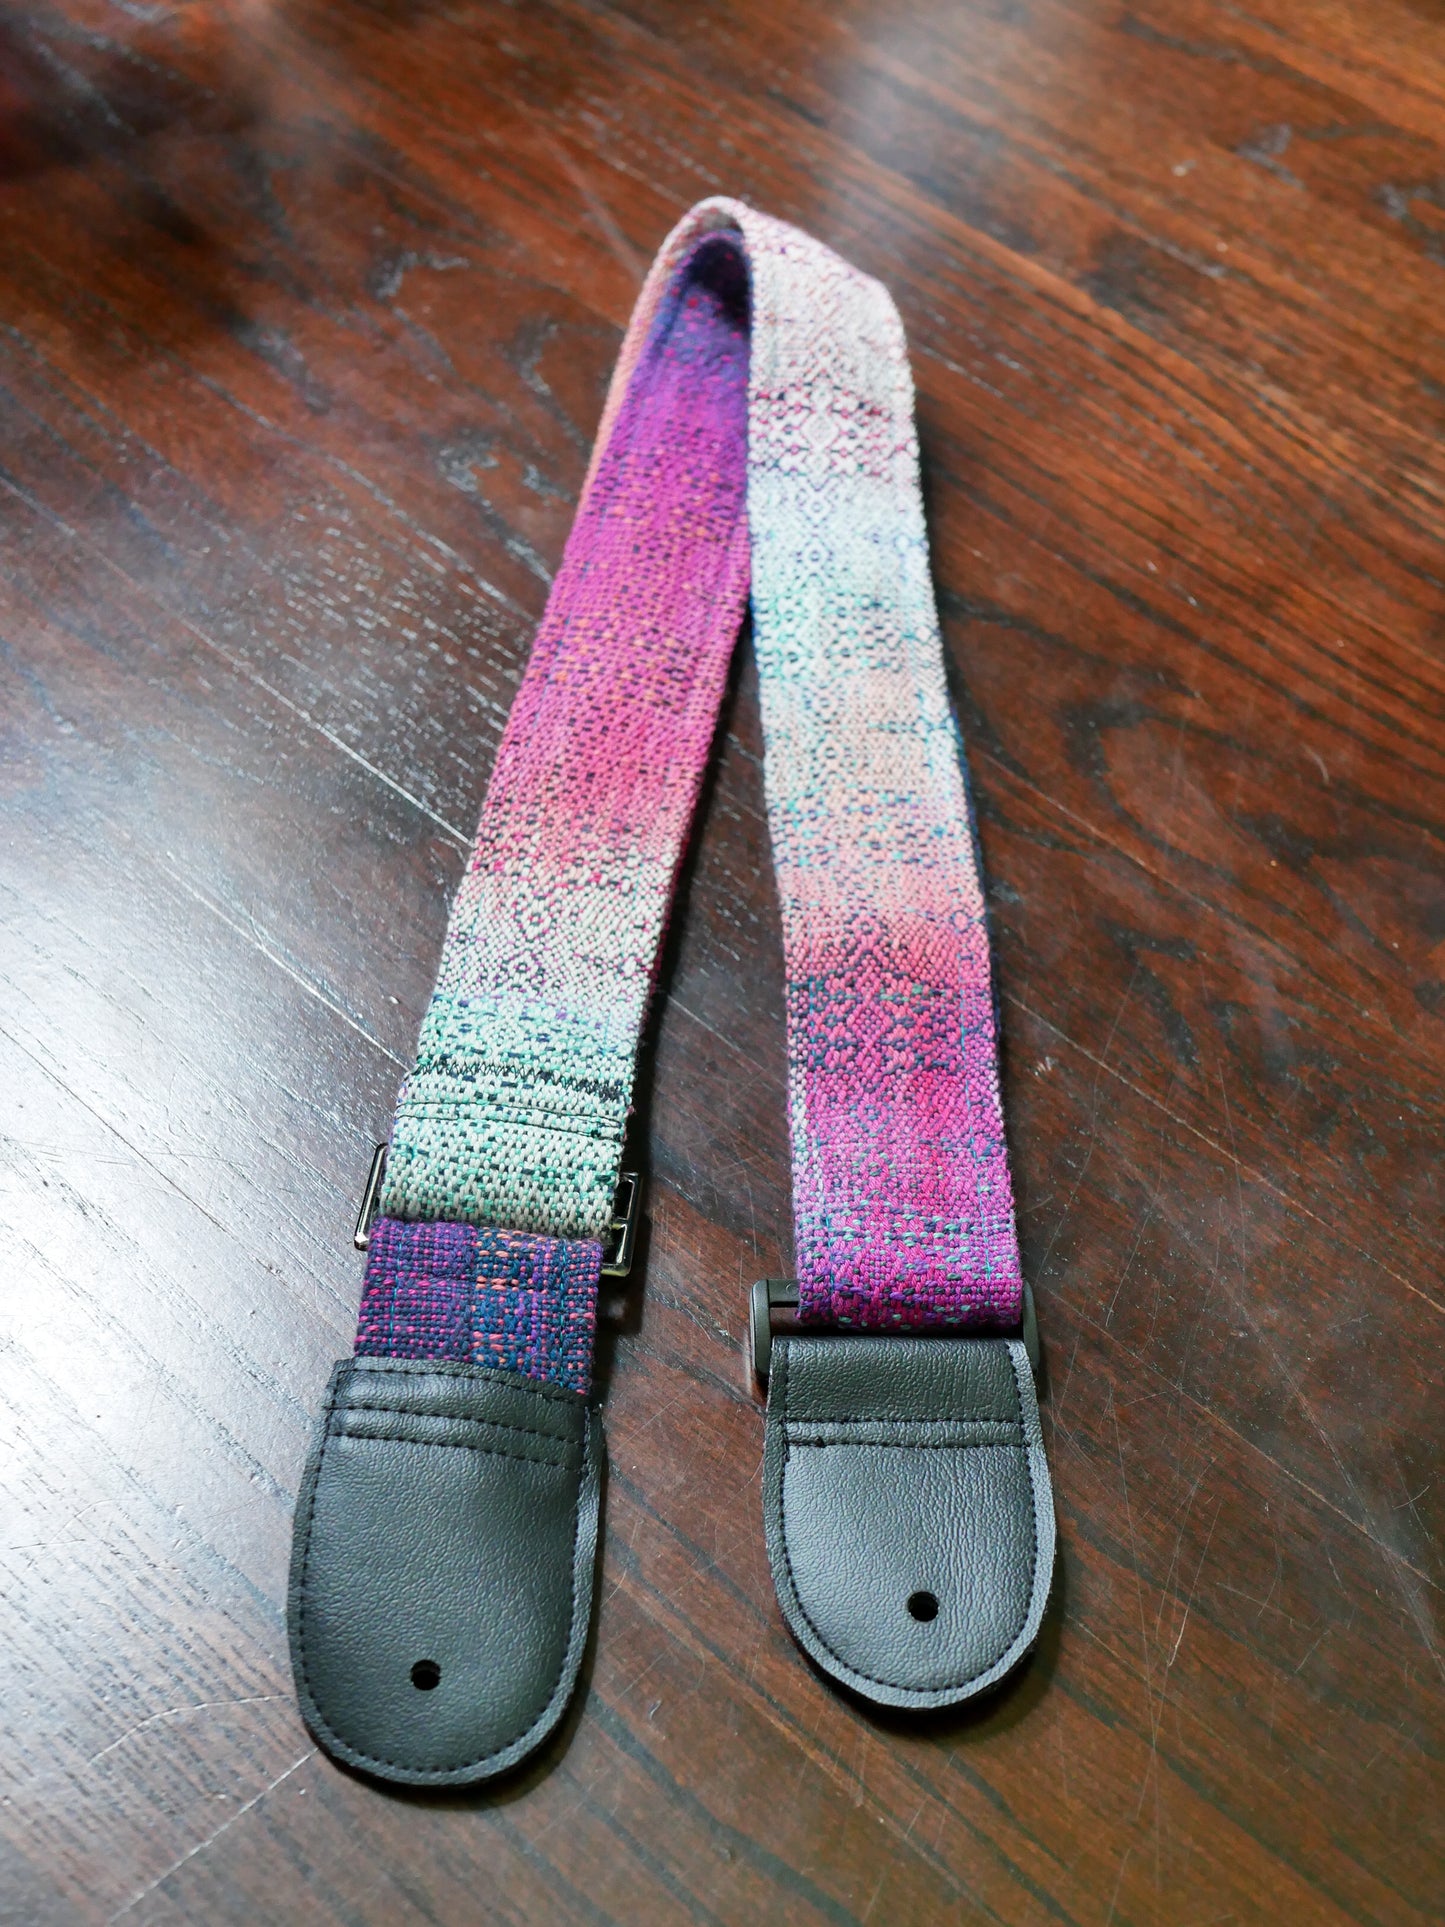 Handwoven Guitar Straps - Surfin' Cow - Free US Shipping